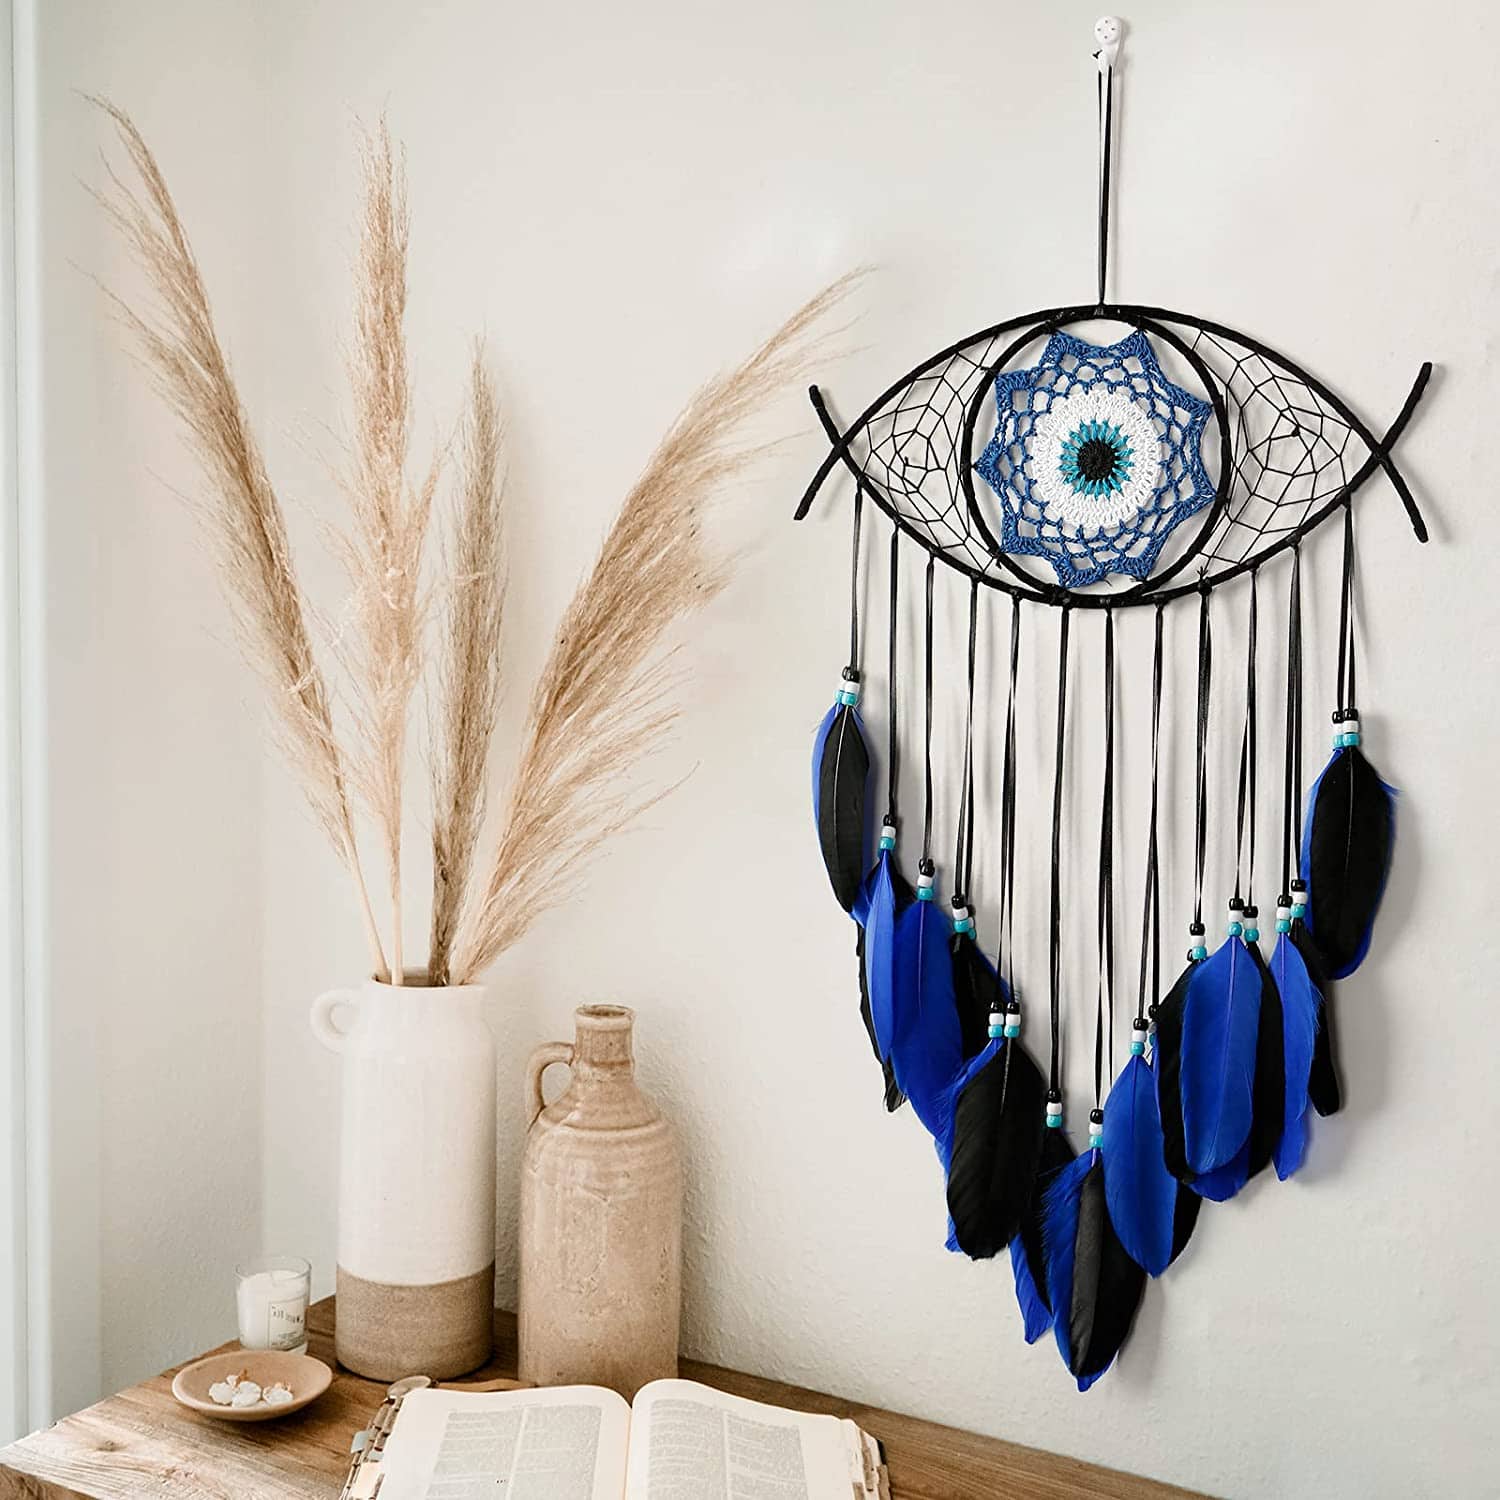 The Deep Meaning of Dreamcatchers: Beyond Feathers and Beads